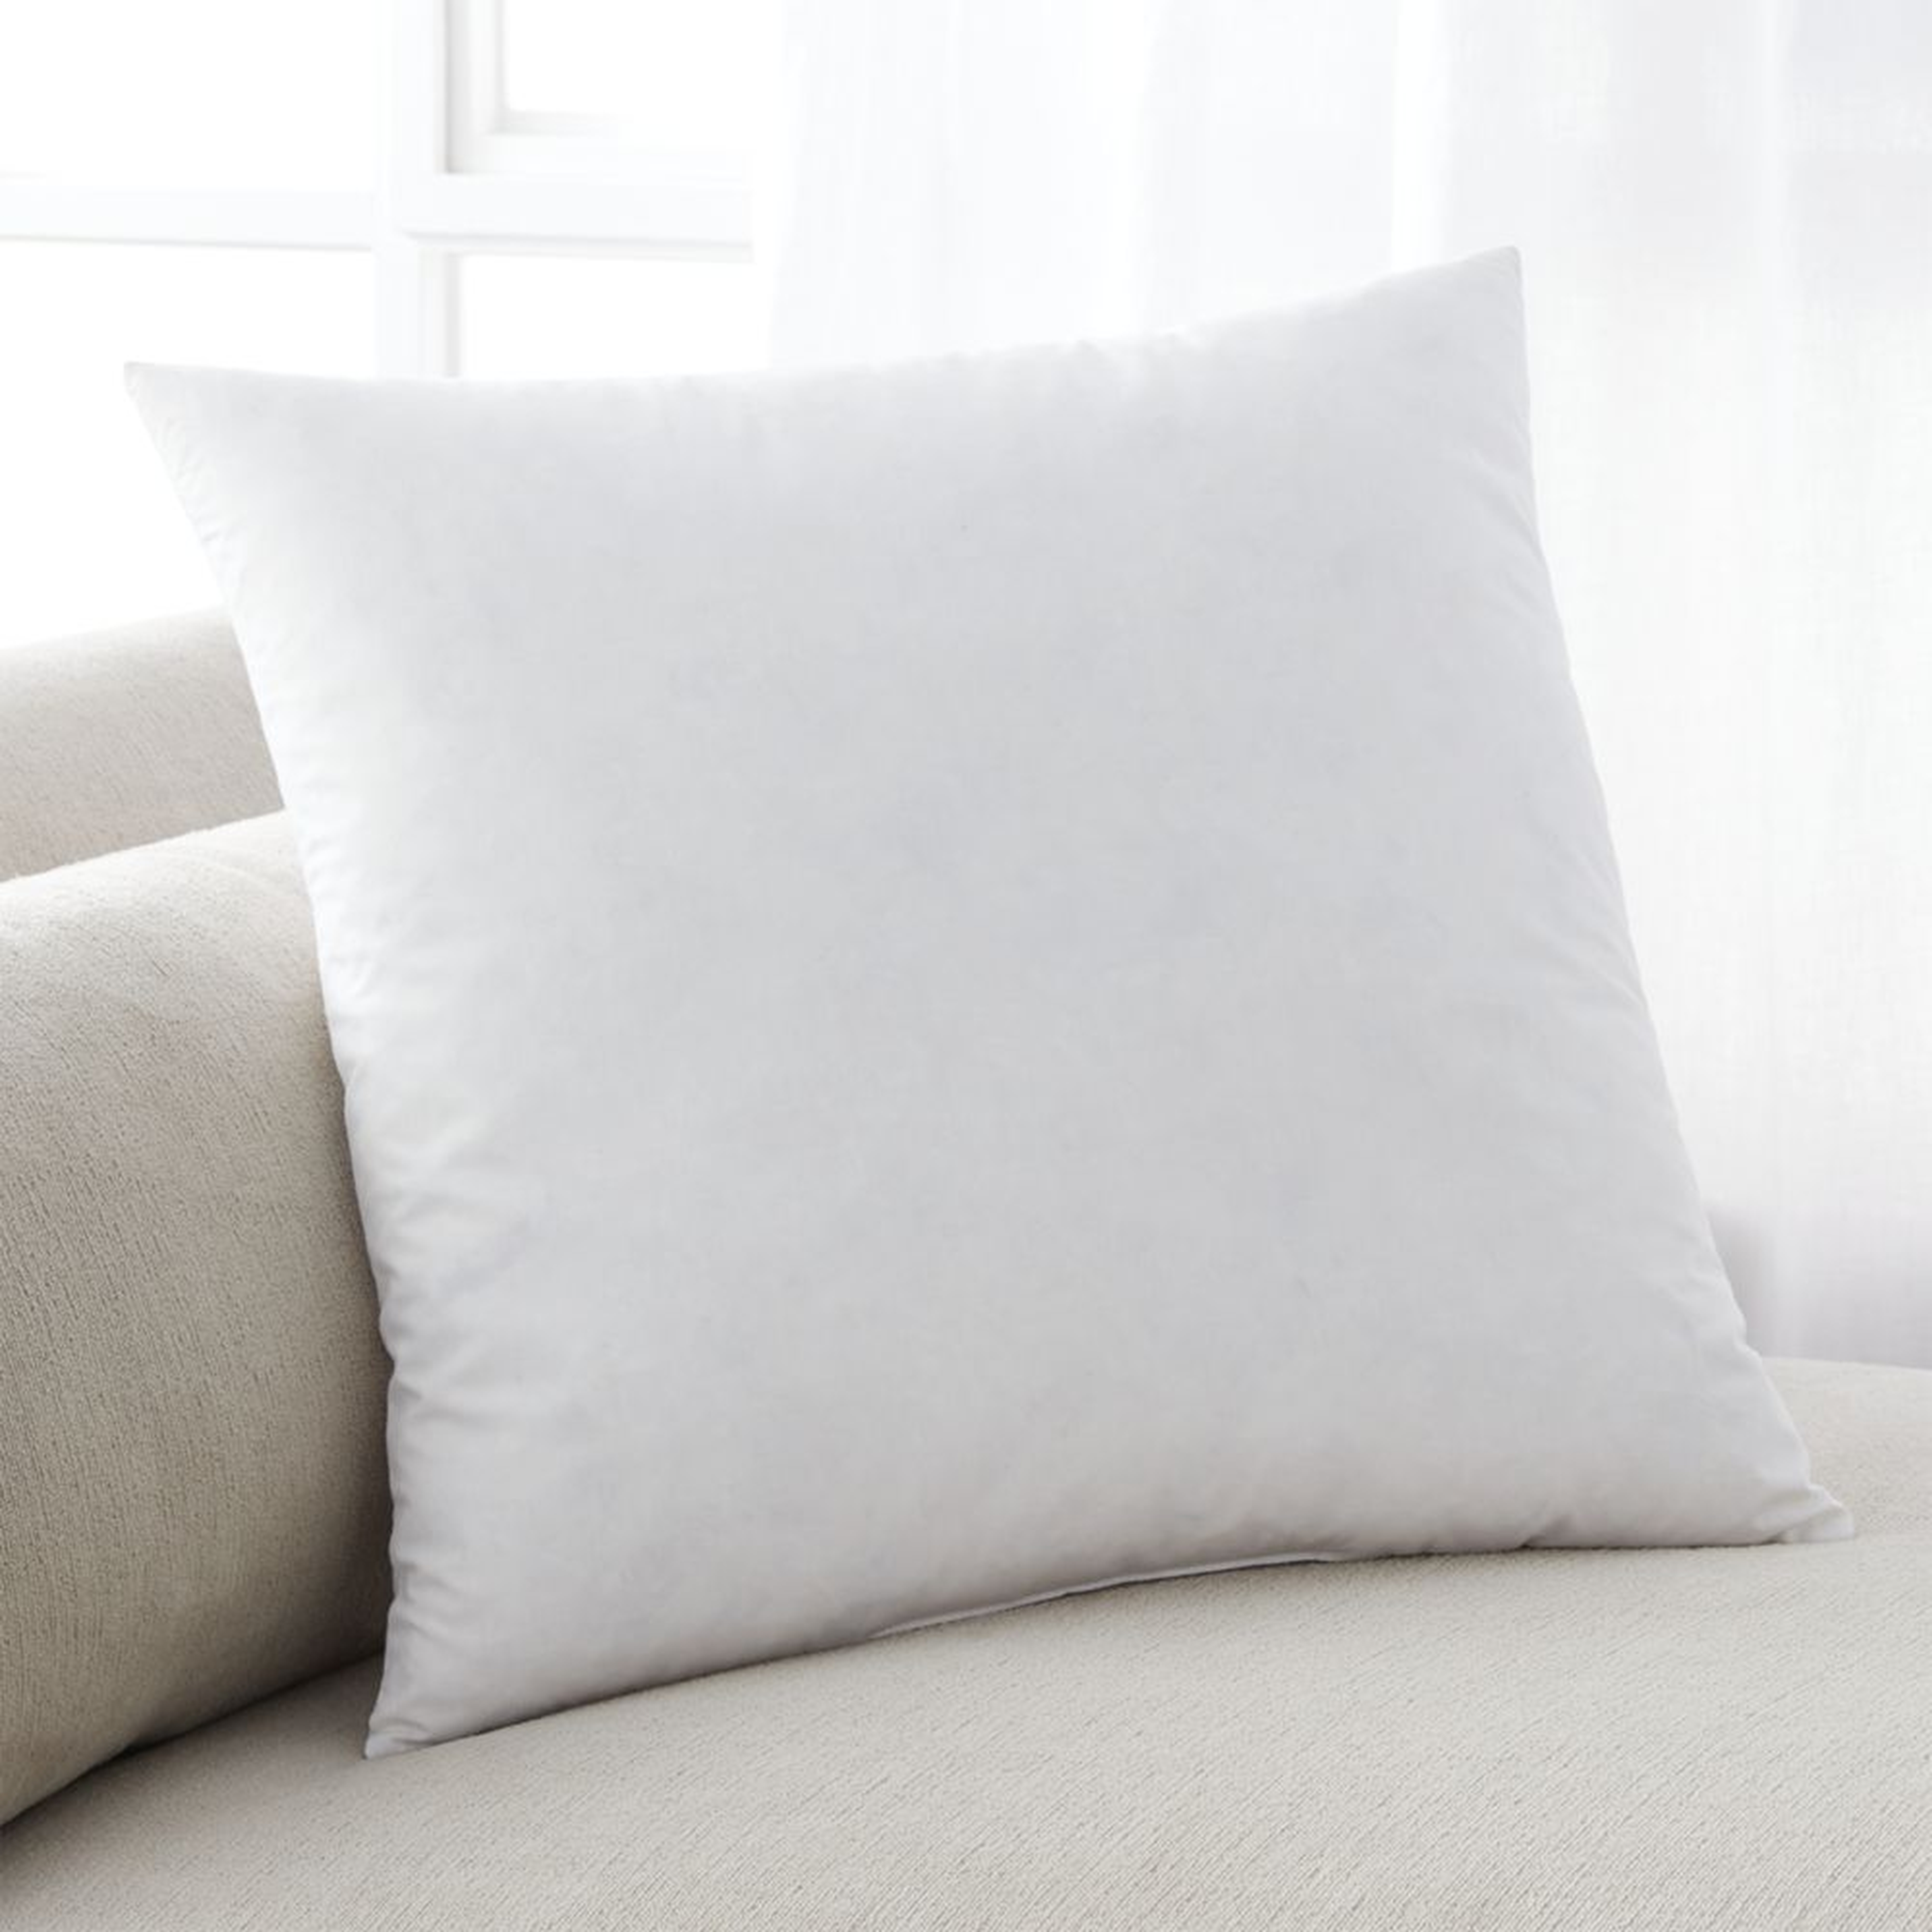 Feather-Down 18" Pillow Insert - Crate and Barrel